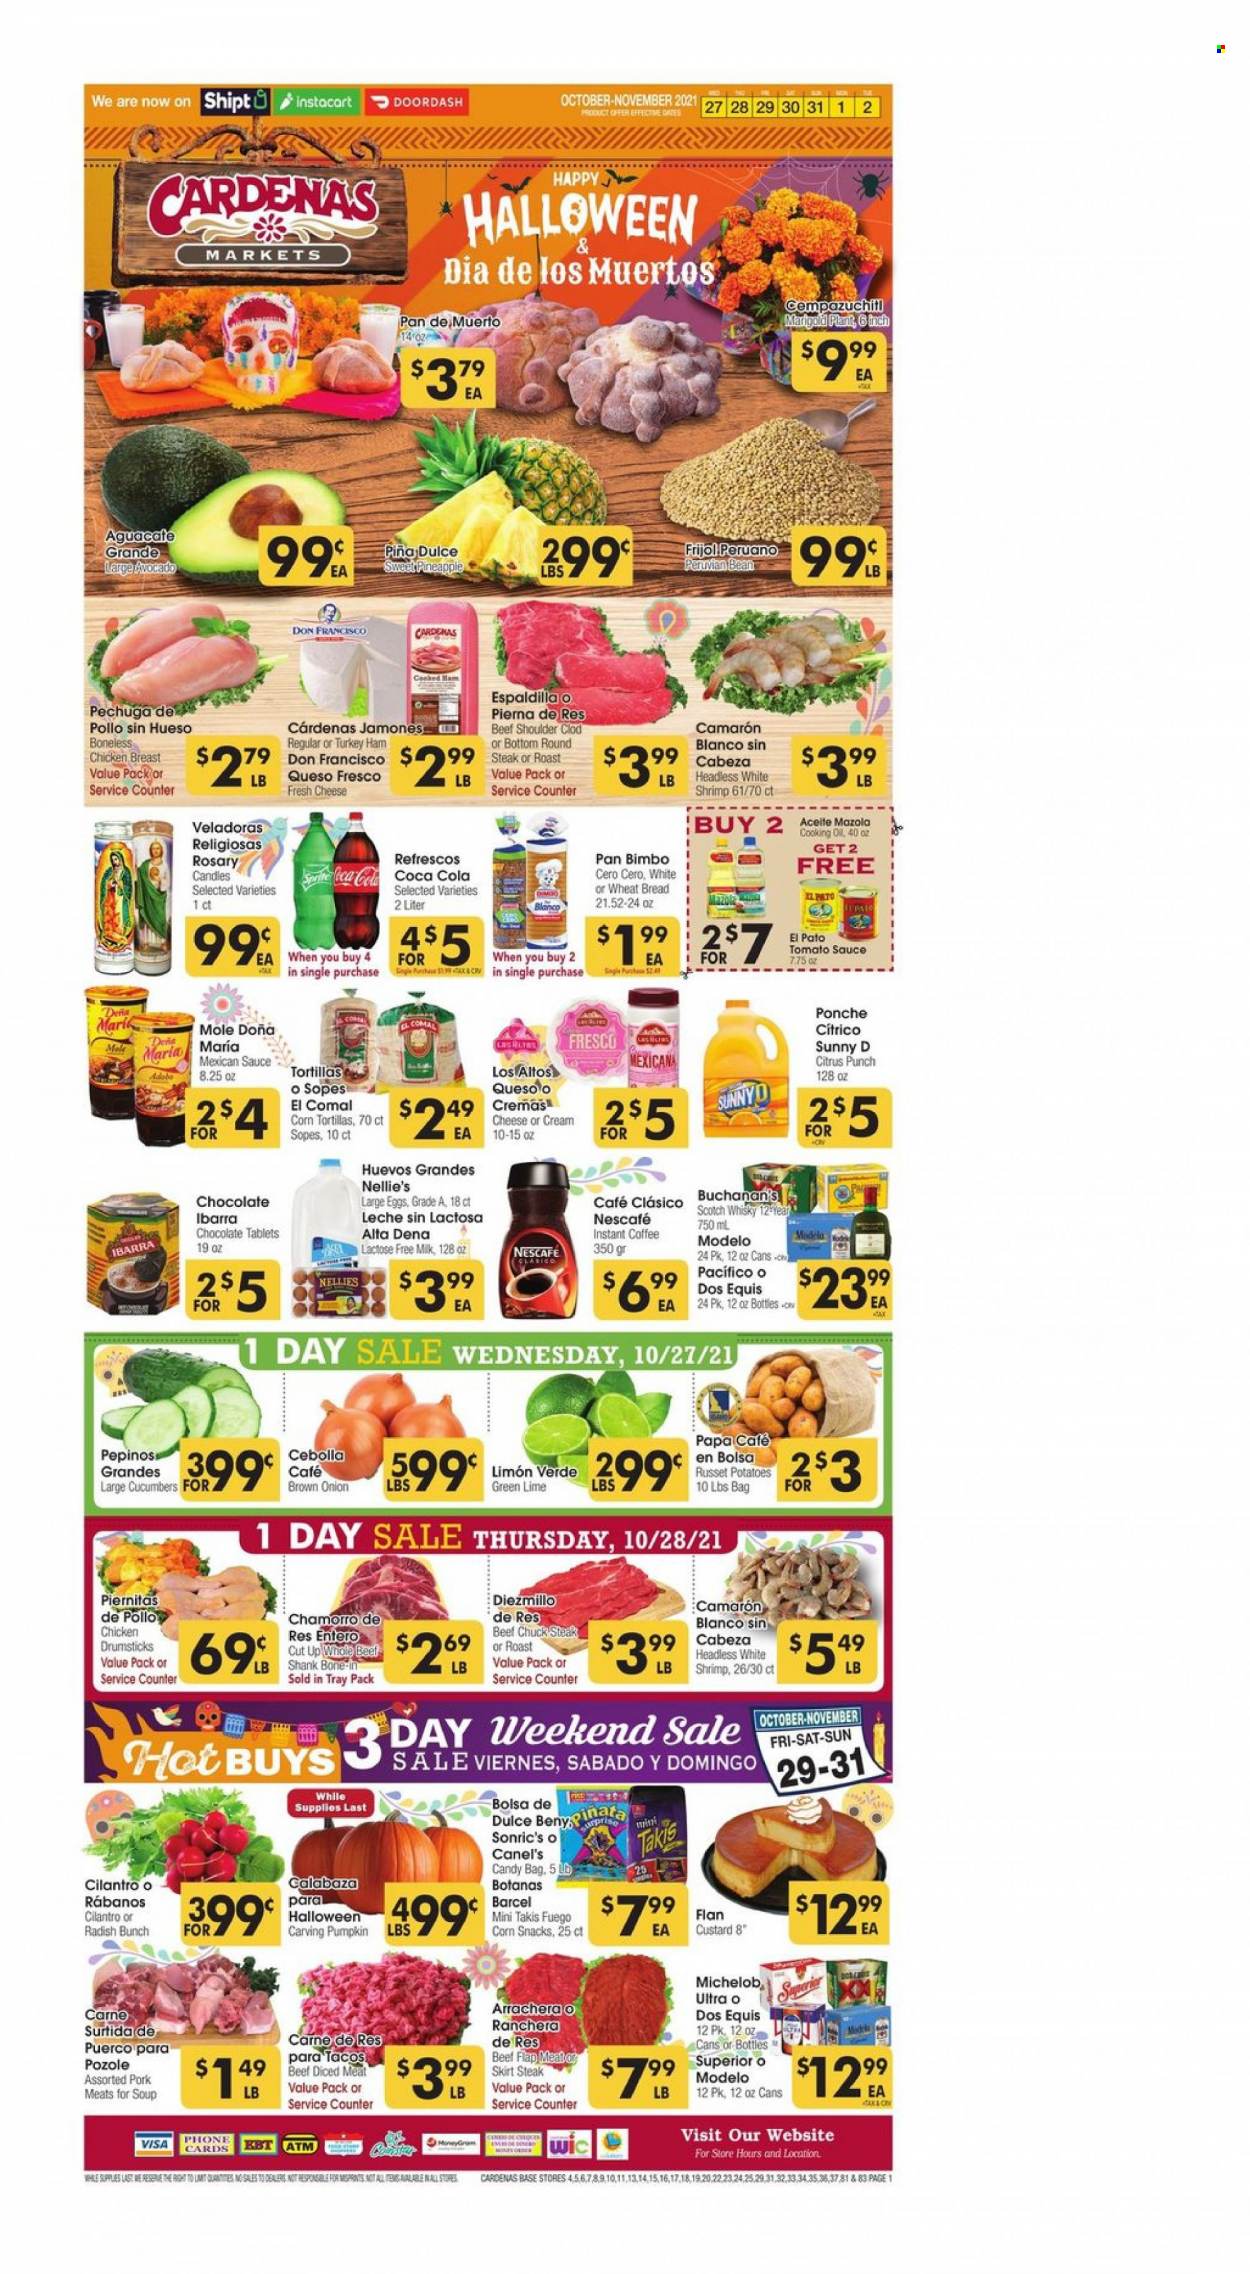 thumbnail - Cardenas Flyer - 10/27/2021 - 11/02/2021 - Sales products - tortillas, wheat bread, radishes, russet potatoes, potatoes, pumpkin, avocado, pineapple, shrimps, soup, sauce, ham, queso fresco, custard, milk, lactose free milk, large eggs, chocolate, snack, tomato sauce, cilantro, adobo sauce, Coca-Cola, fruit punch, instant coffee, Nescafé, scotch whisky, whisky, beer, Modelo, chicken breasts, chicken drumsticks, beef meat, beef shank, steak, chuck steak, pan, candle, veladoras religiosas, Halloween, Dos Equis, Michelob. Page 1.